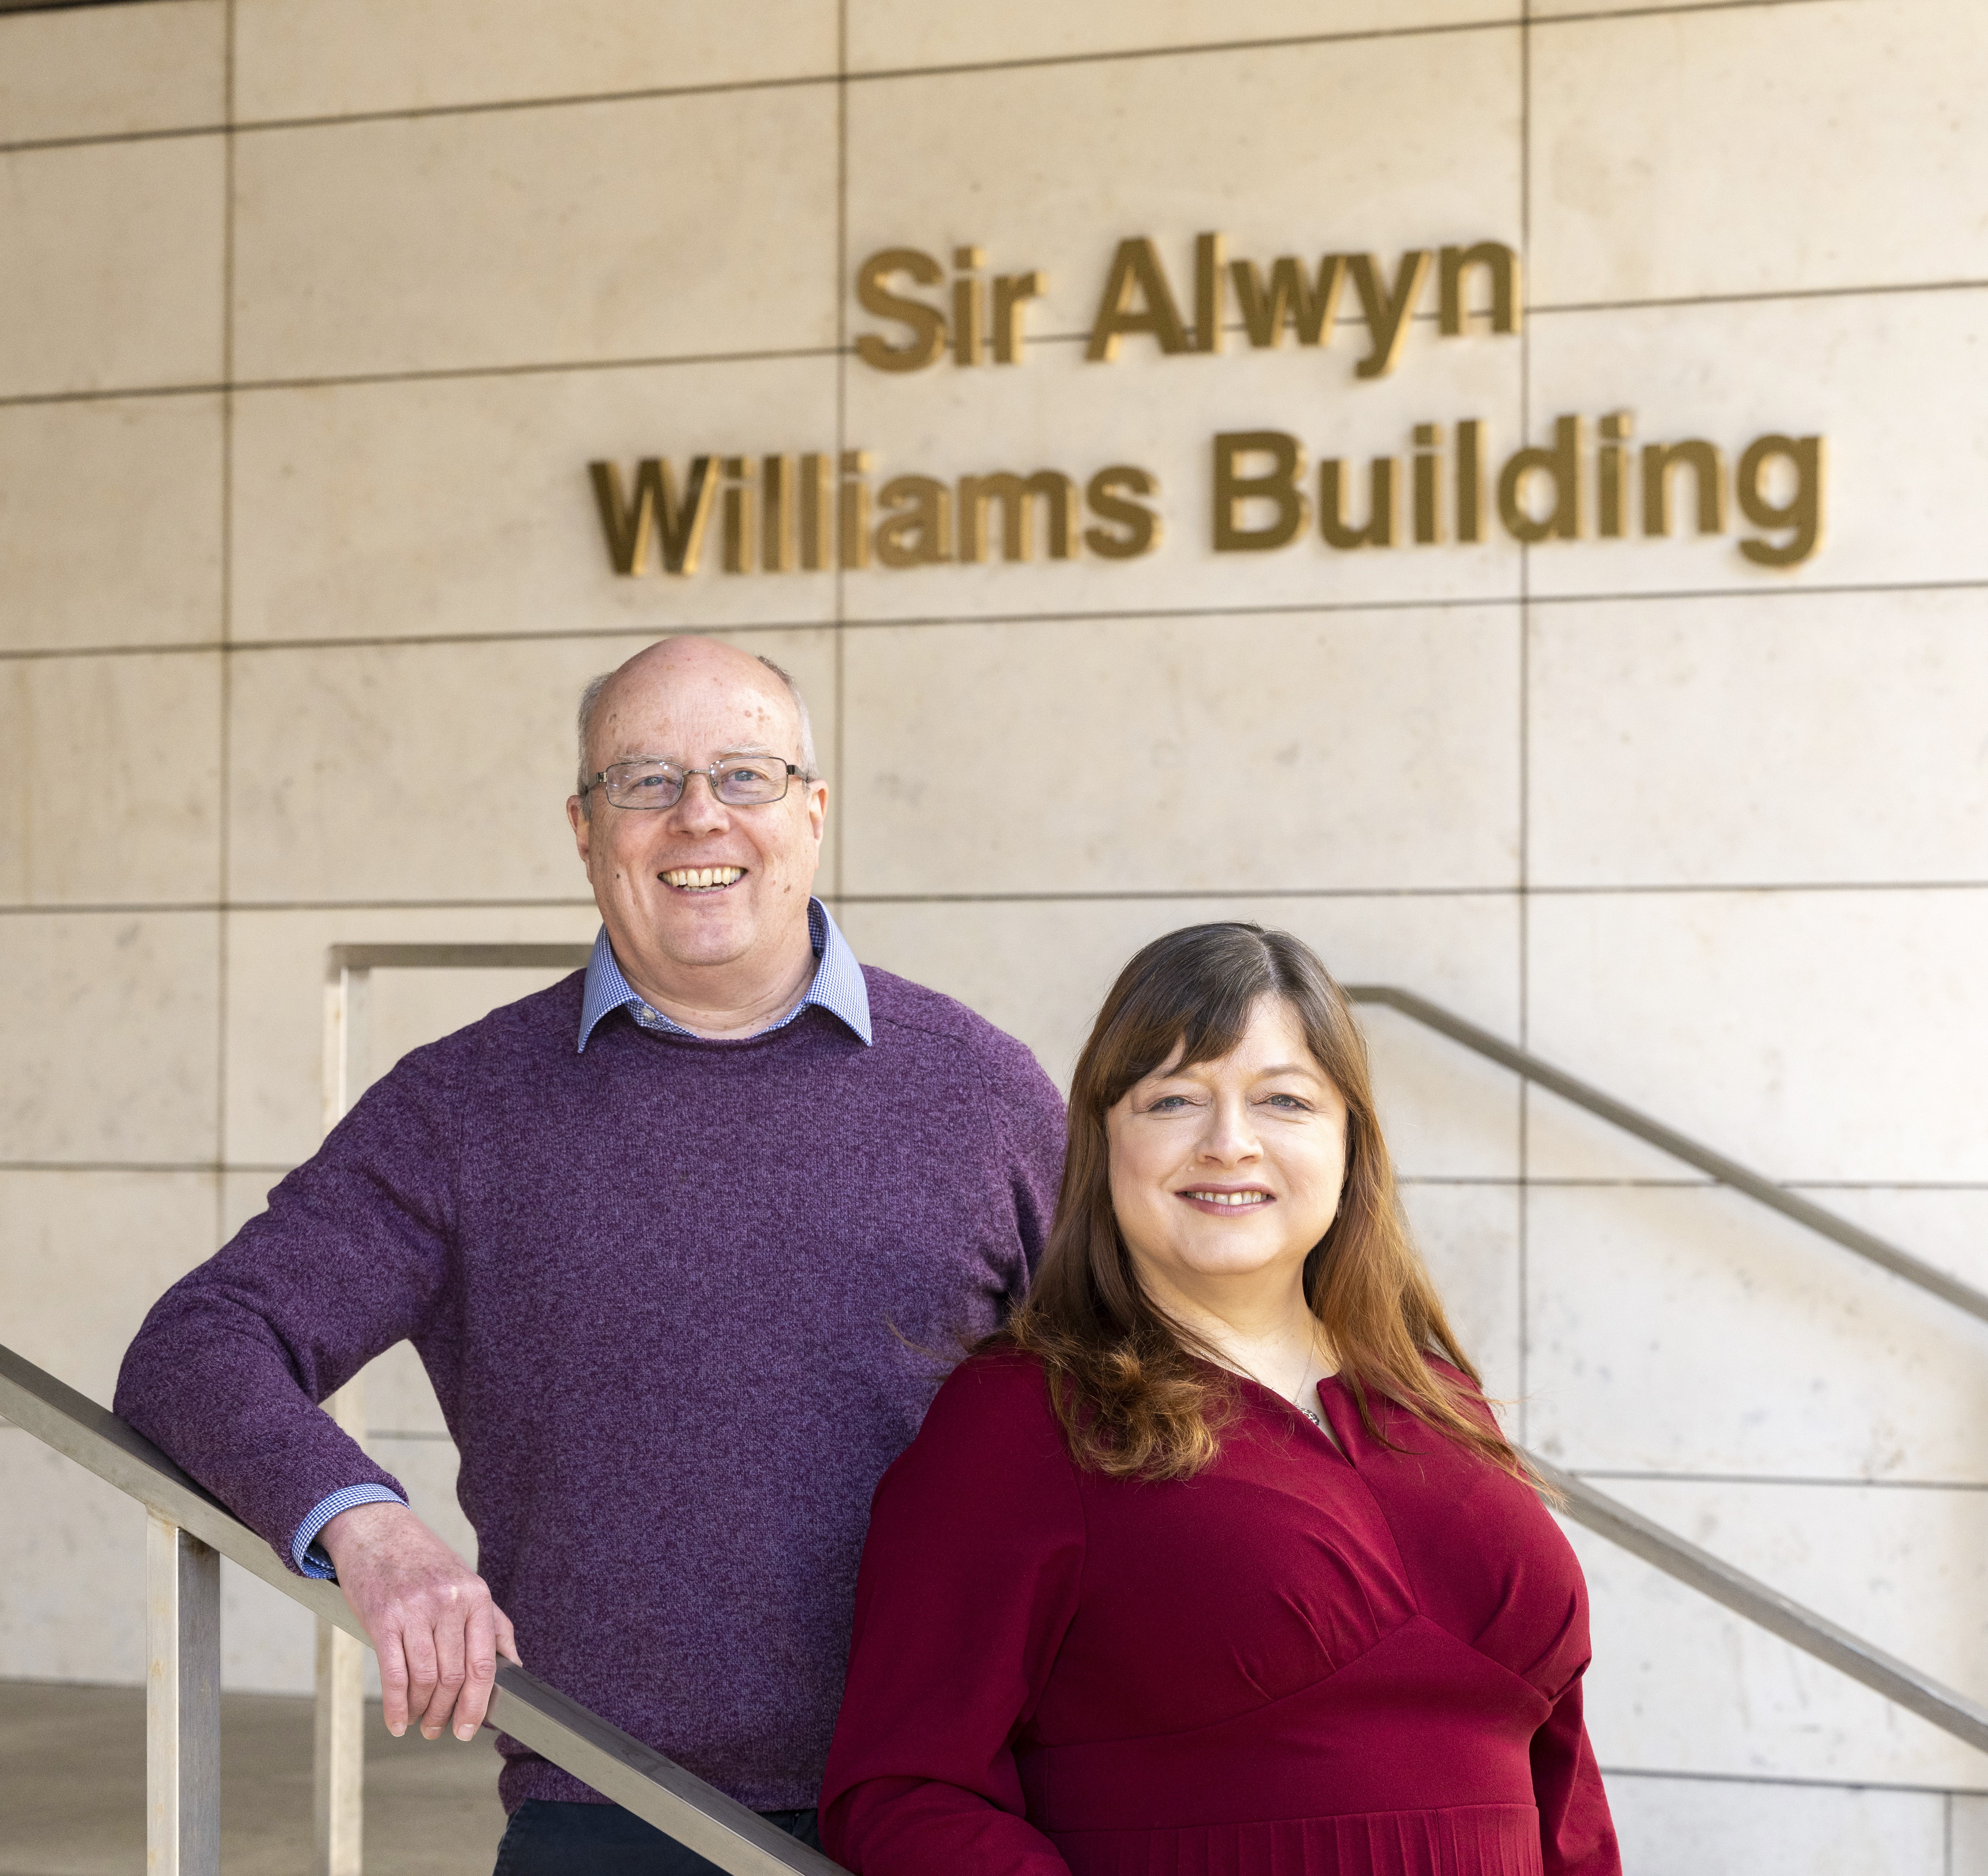 Professor Phil Trinder and Jill Dykes, co-directors of the Glasgow Computing Innovation Laboratory, GLACSIL